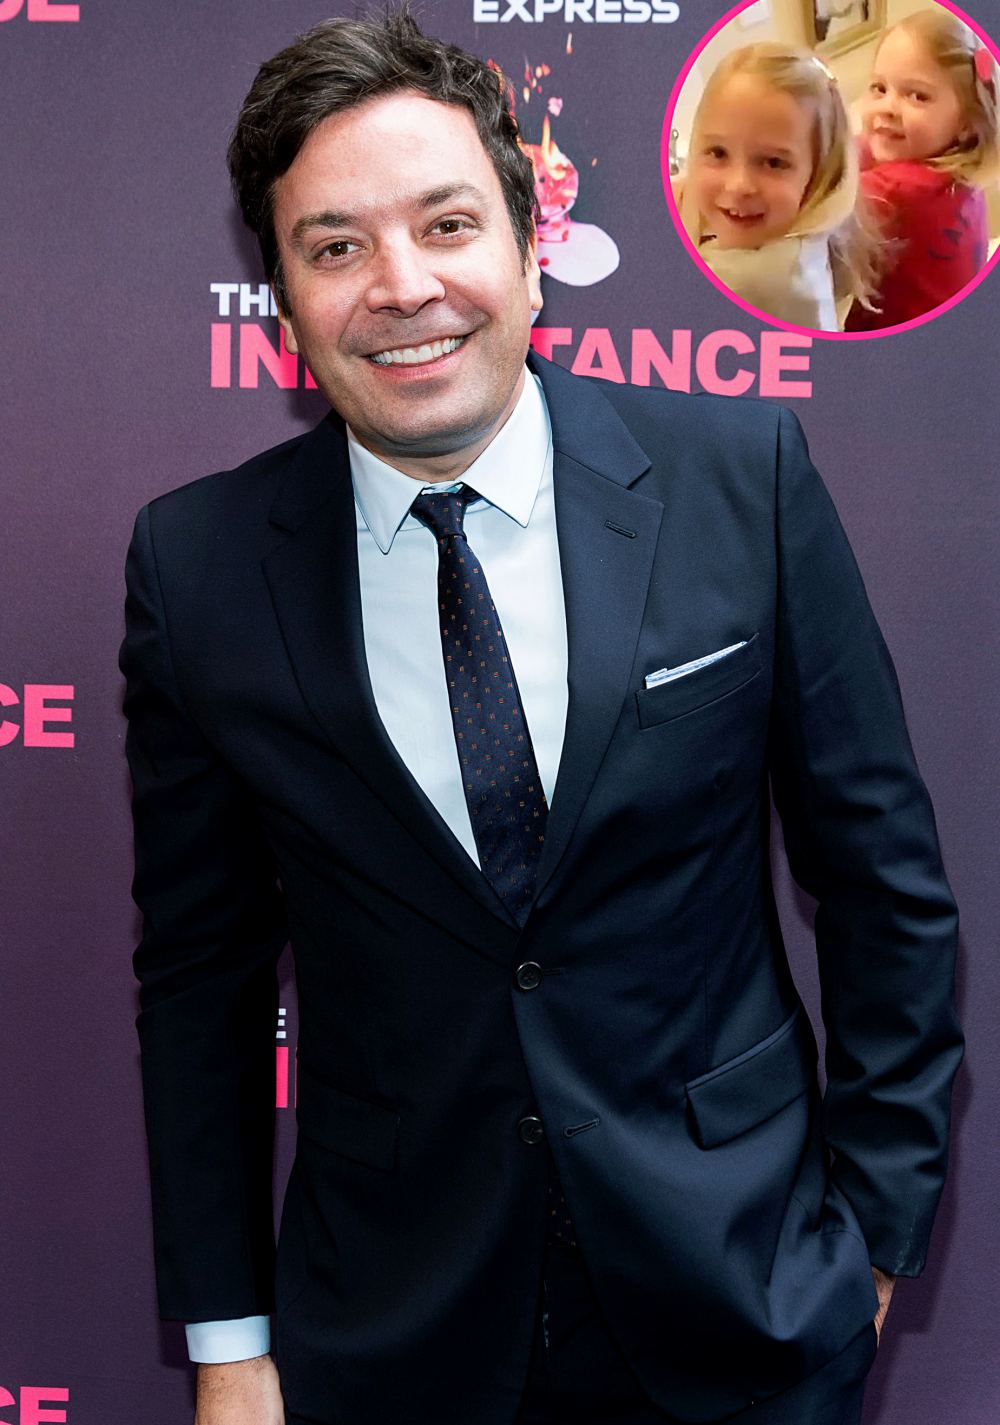 How Jimmy Fallon Feels About Daughters Crashing Interviews Amid Quarantine